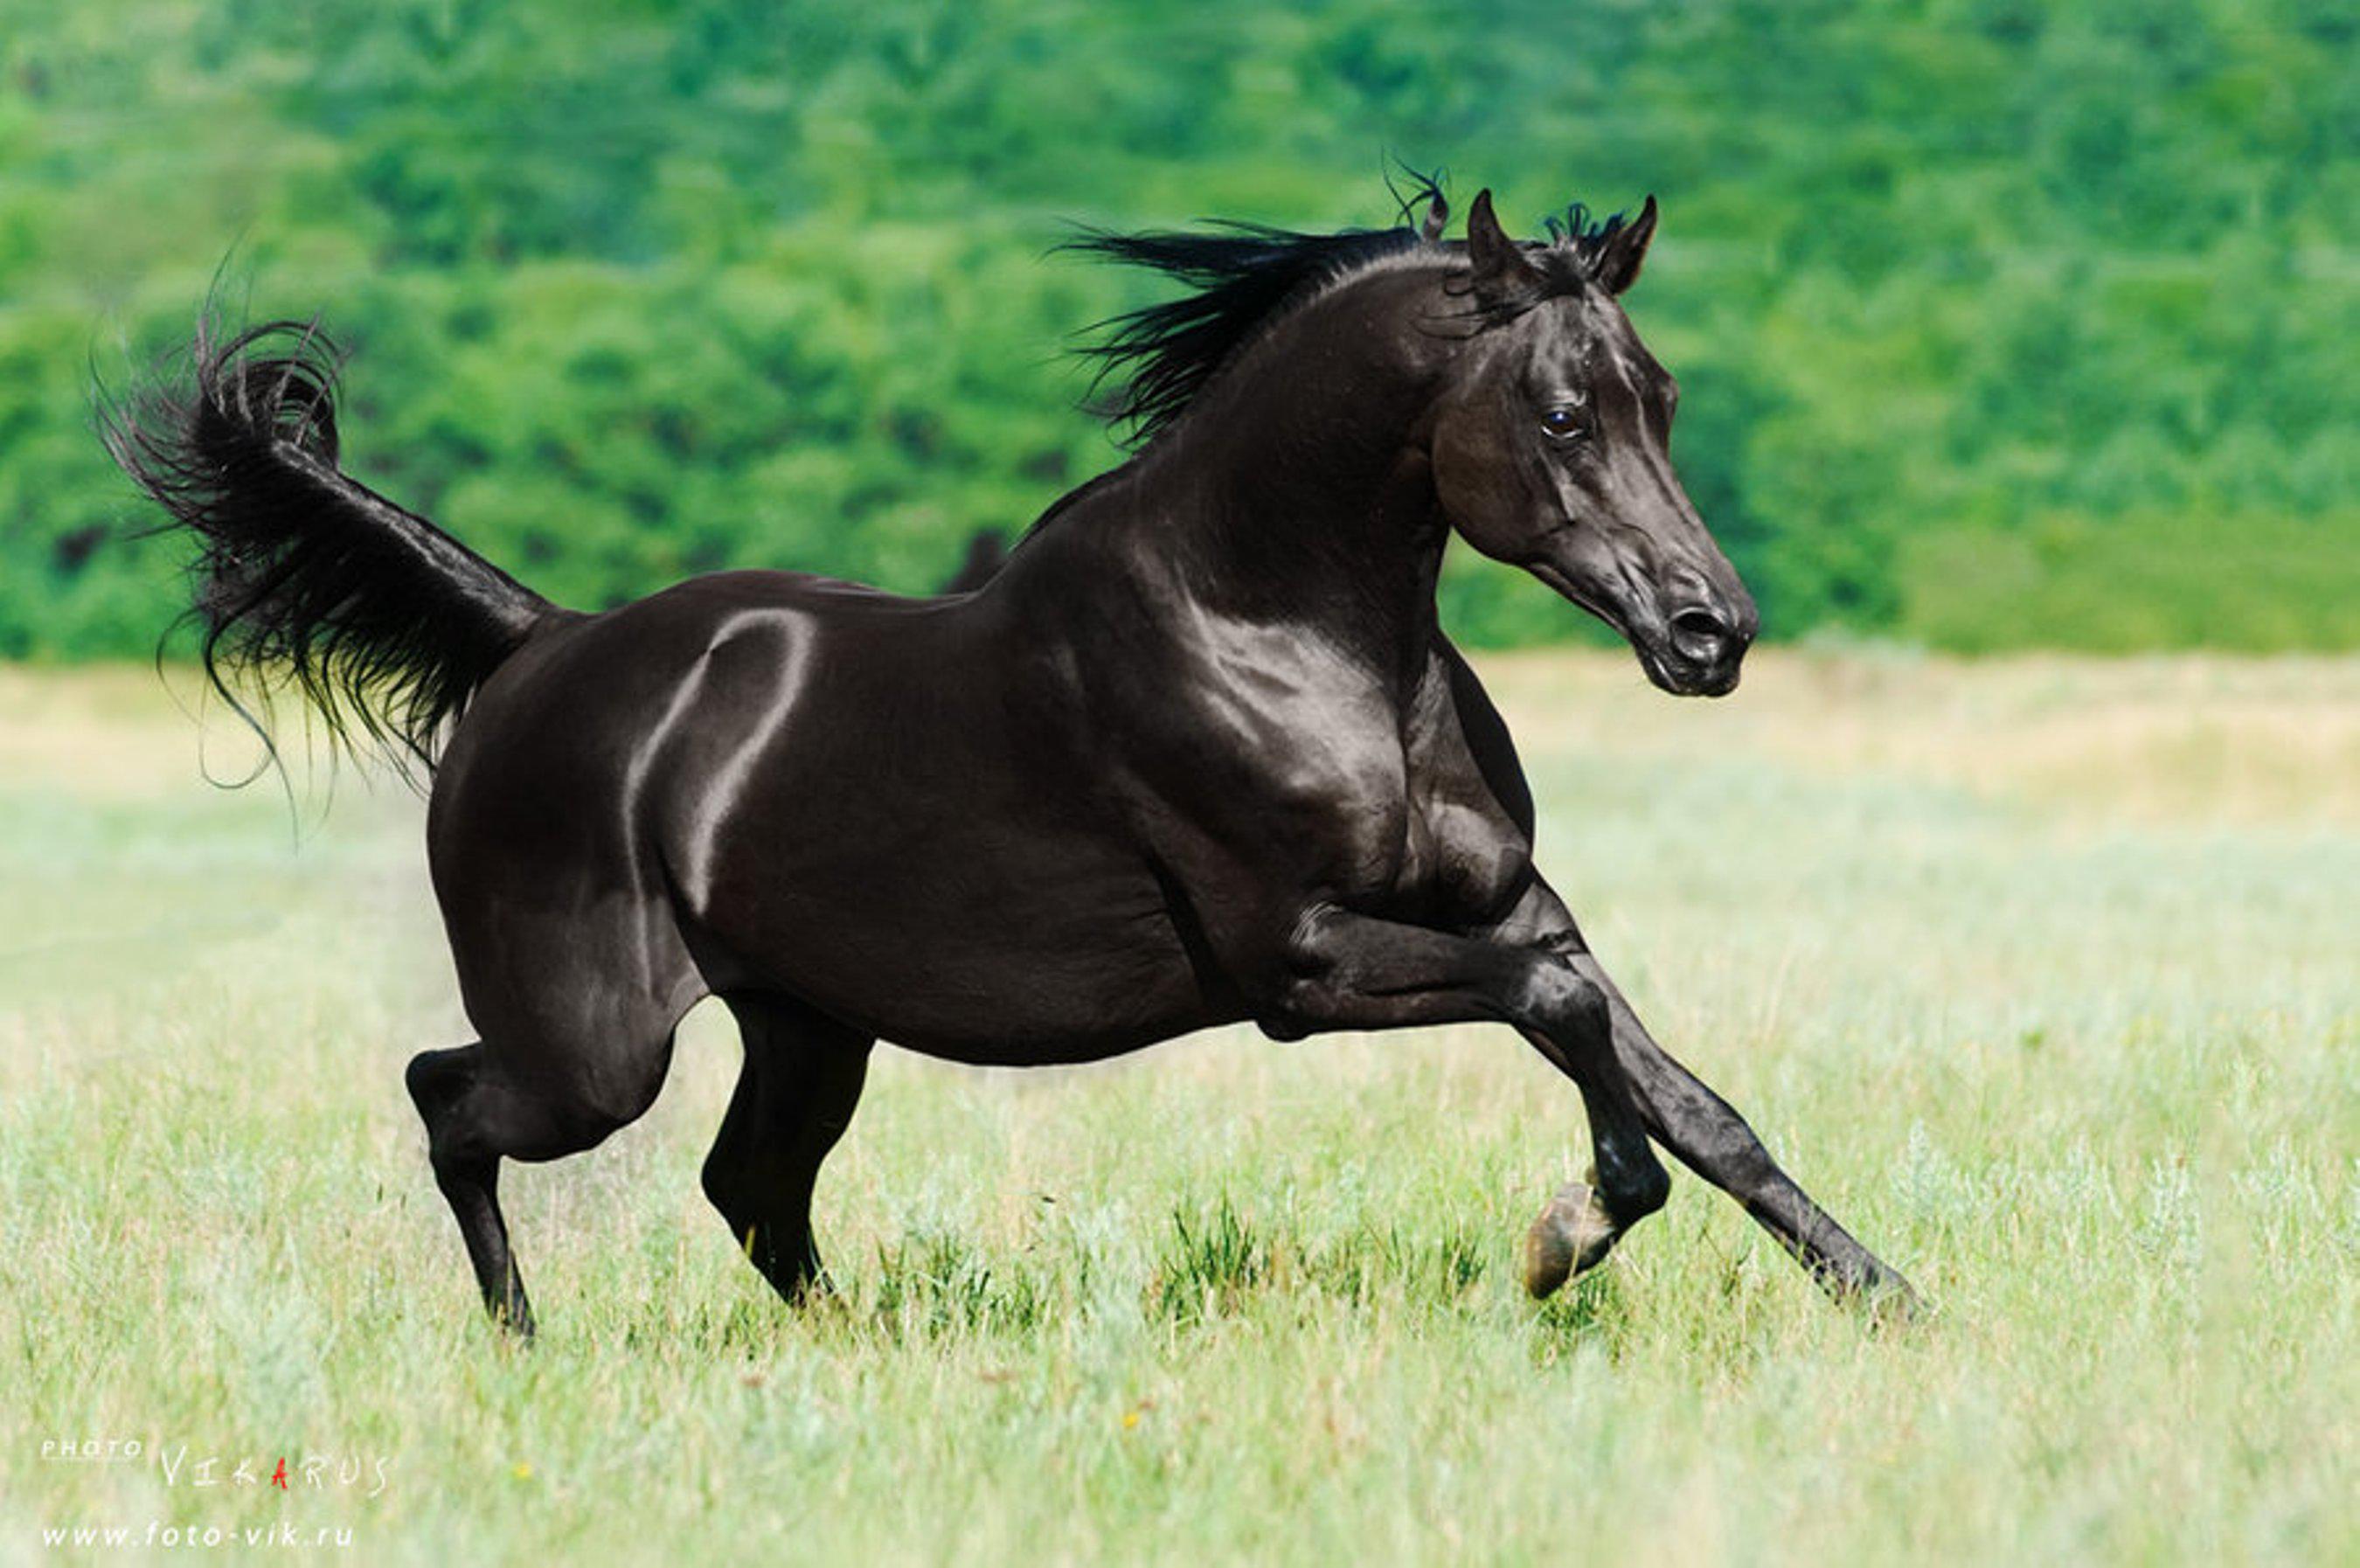 Stallion Horse Wallpapers, Images, Photos, Pictures & Pics